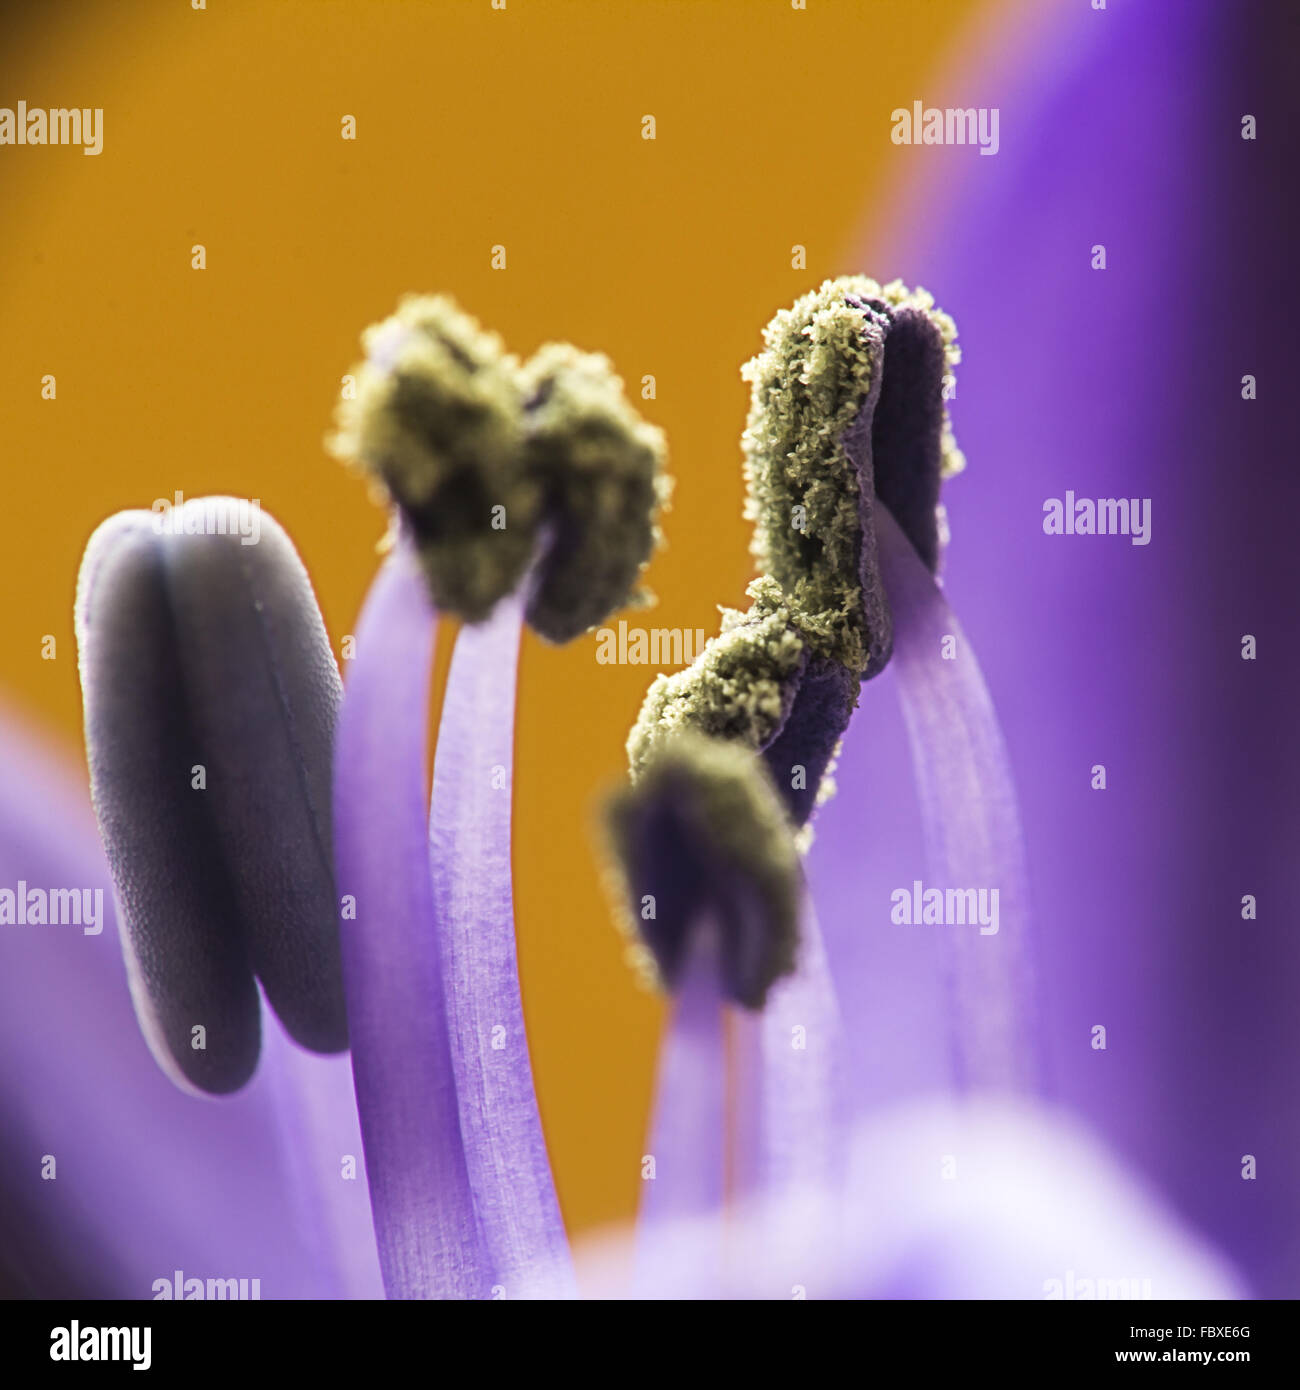 Stamens and pistils of a flower Stock Photo